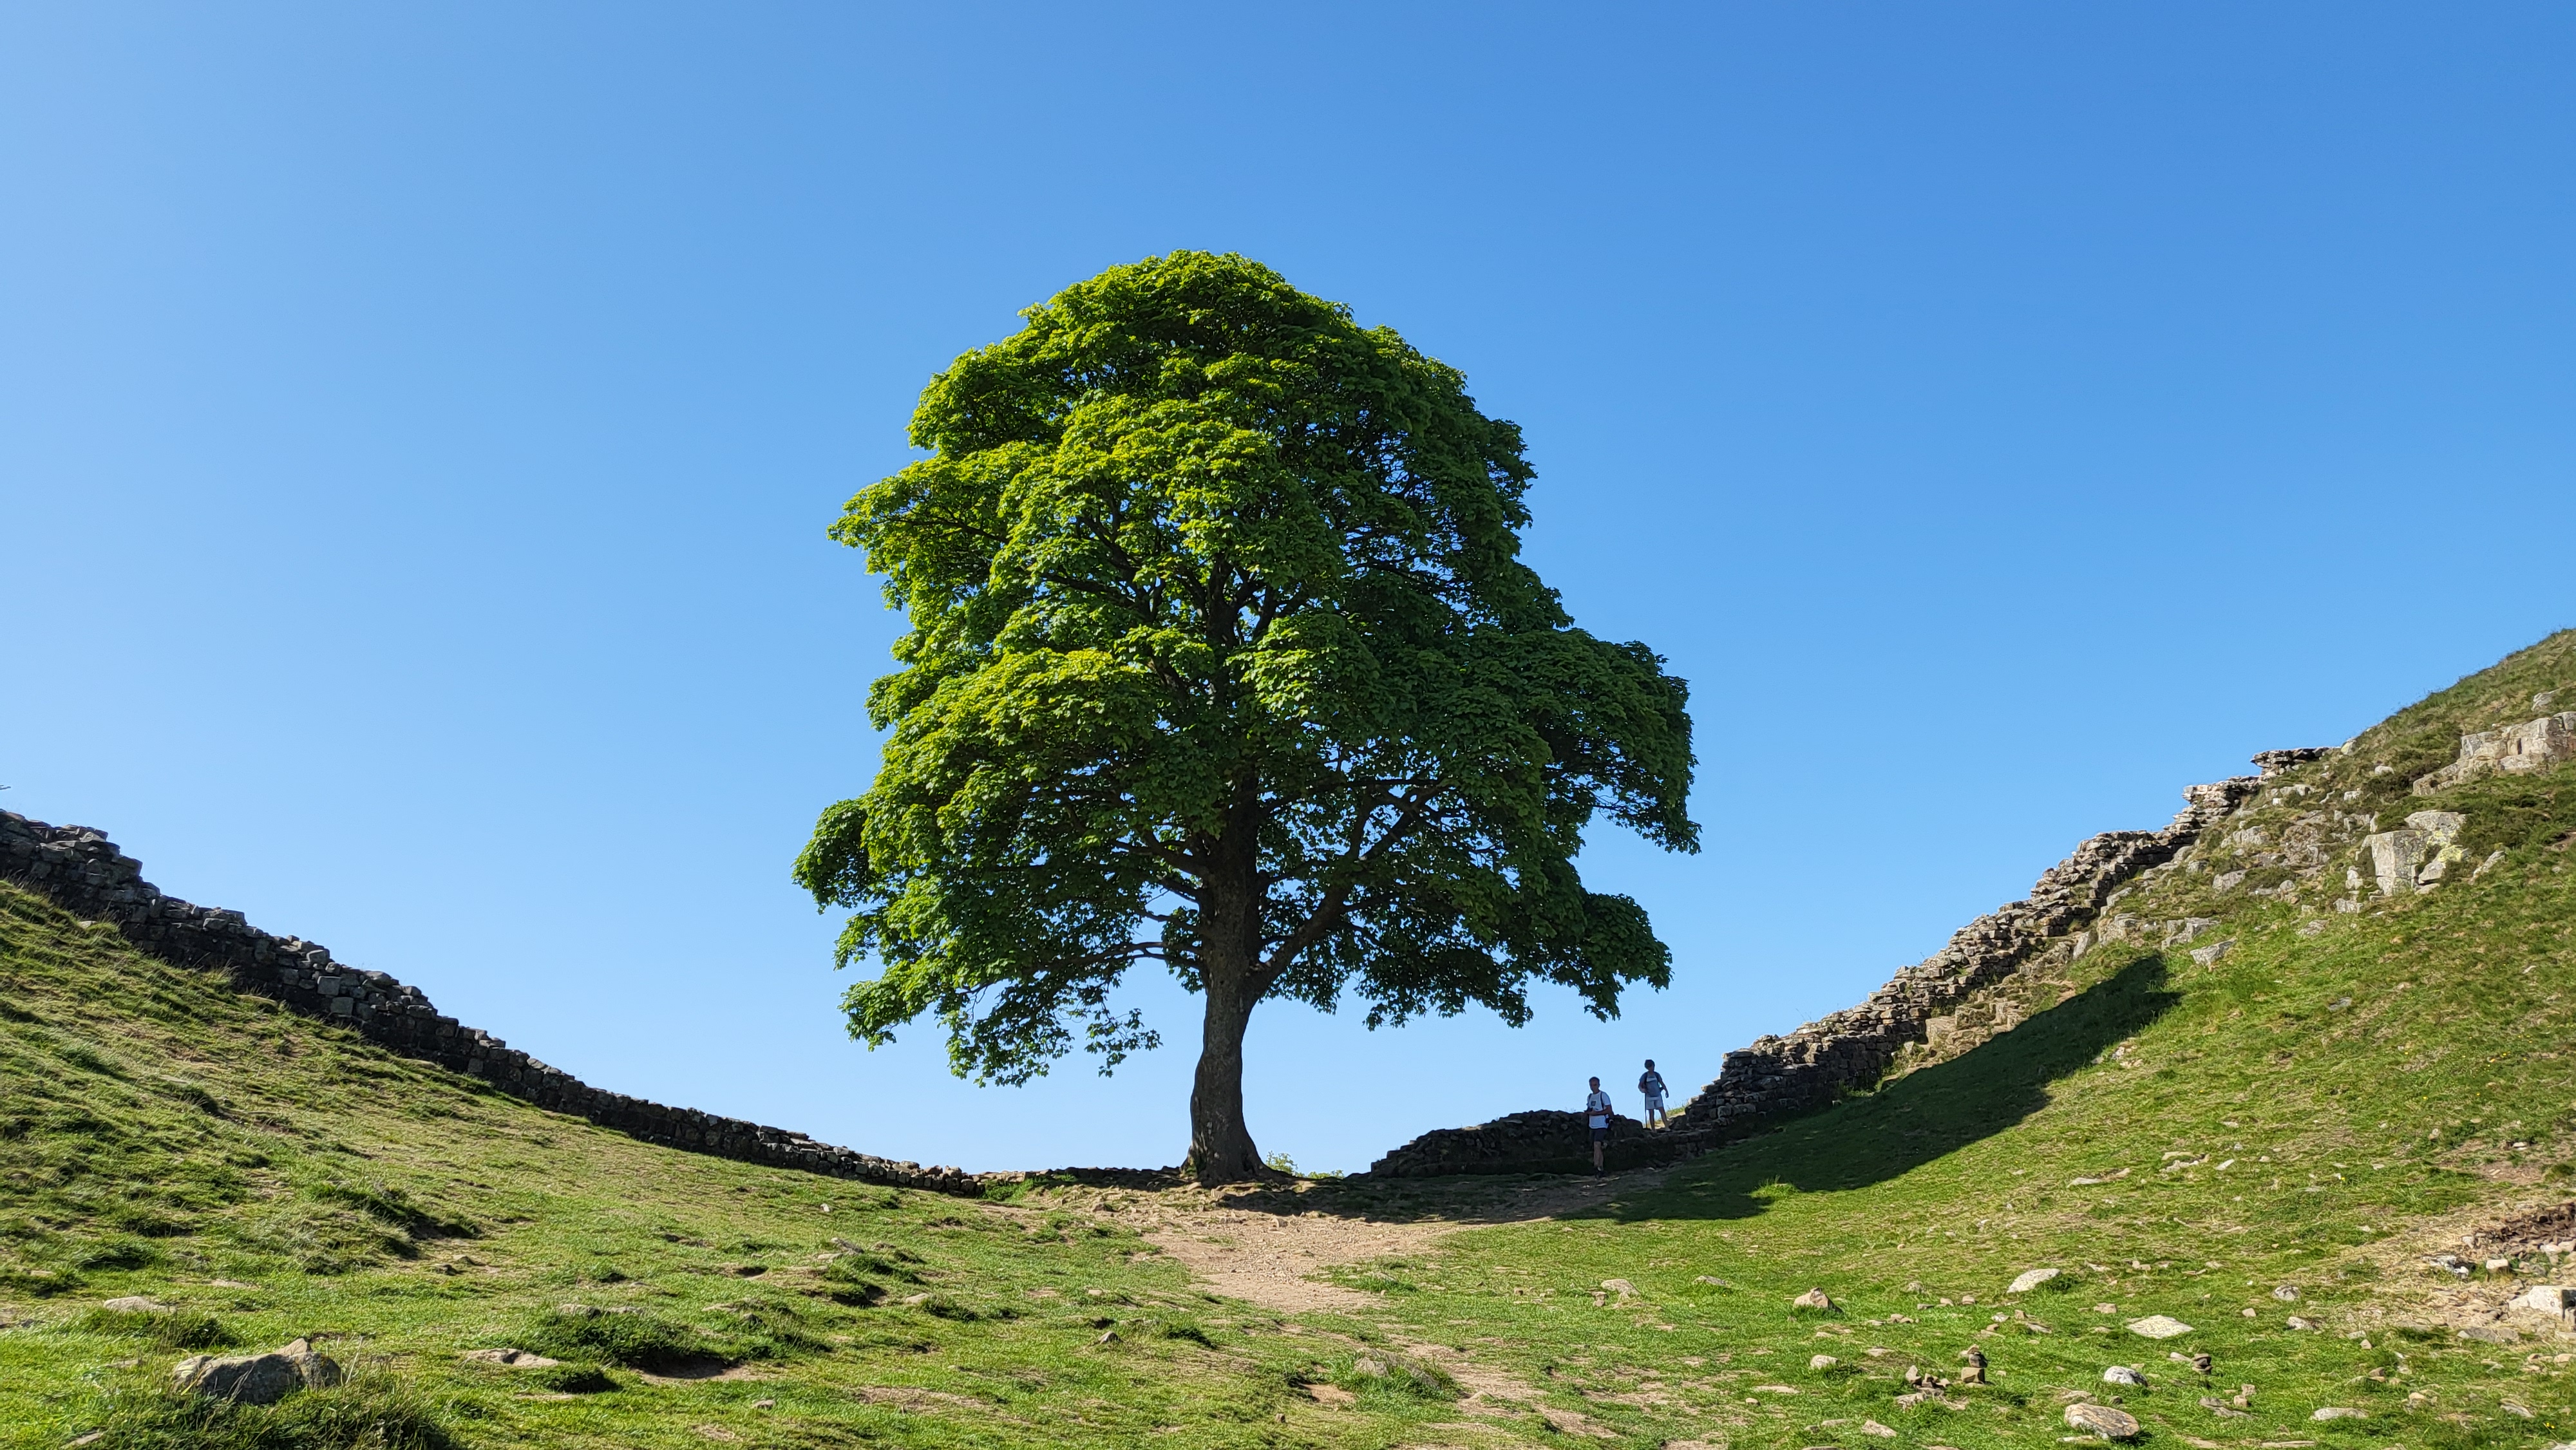 Sycamore tree growing on Roman wall